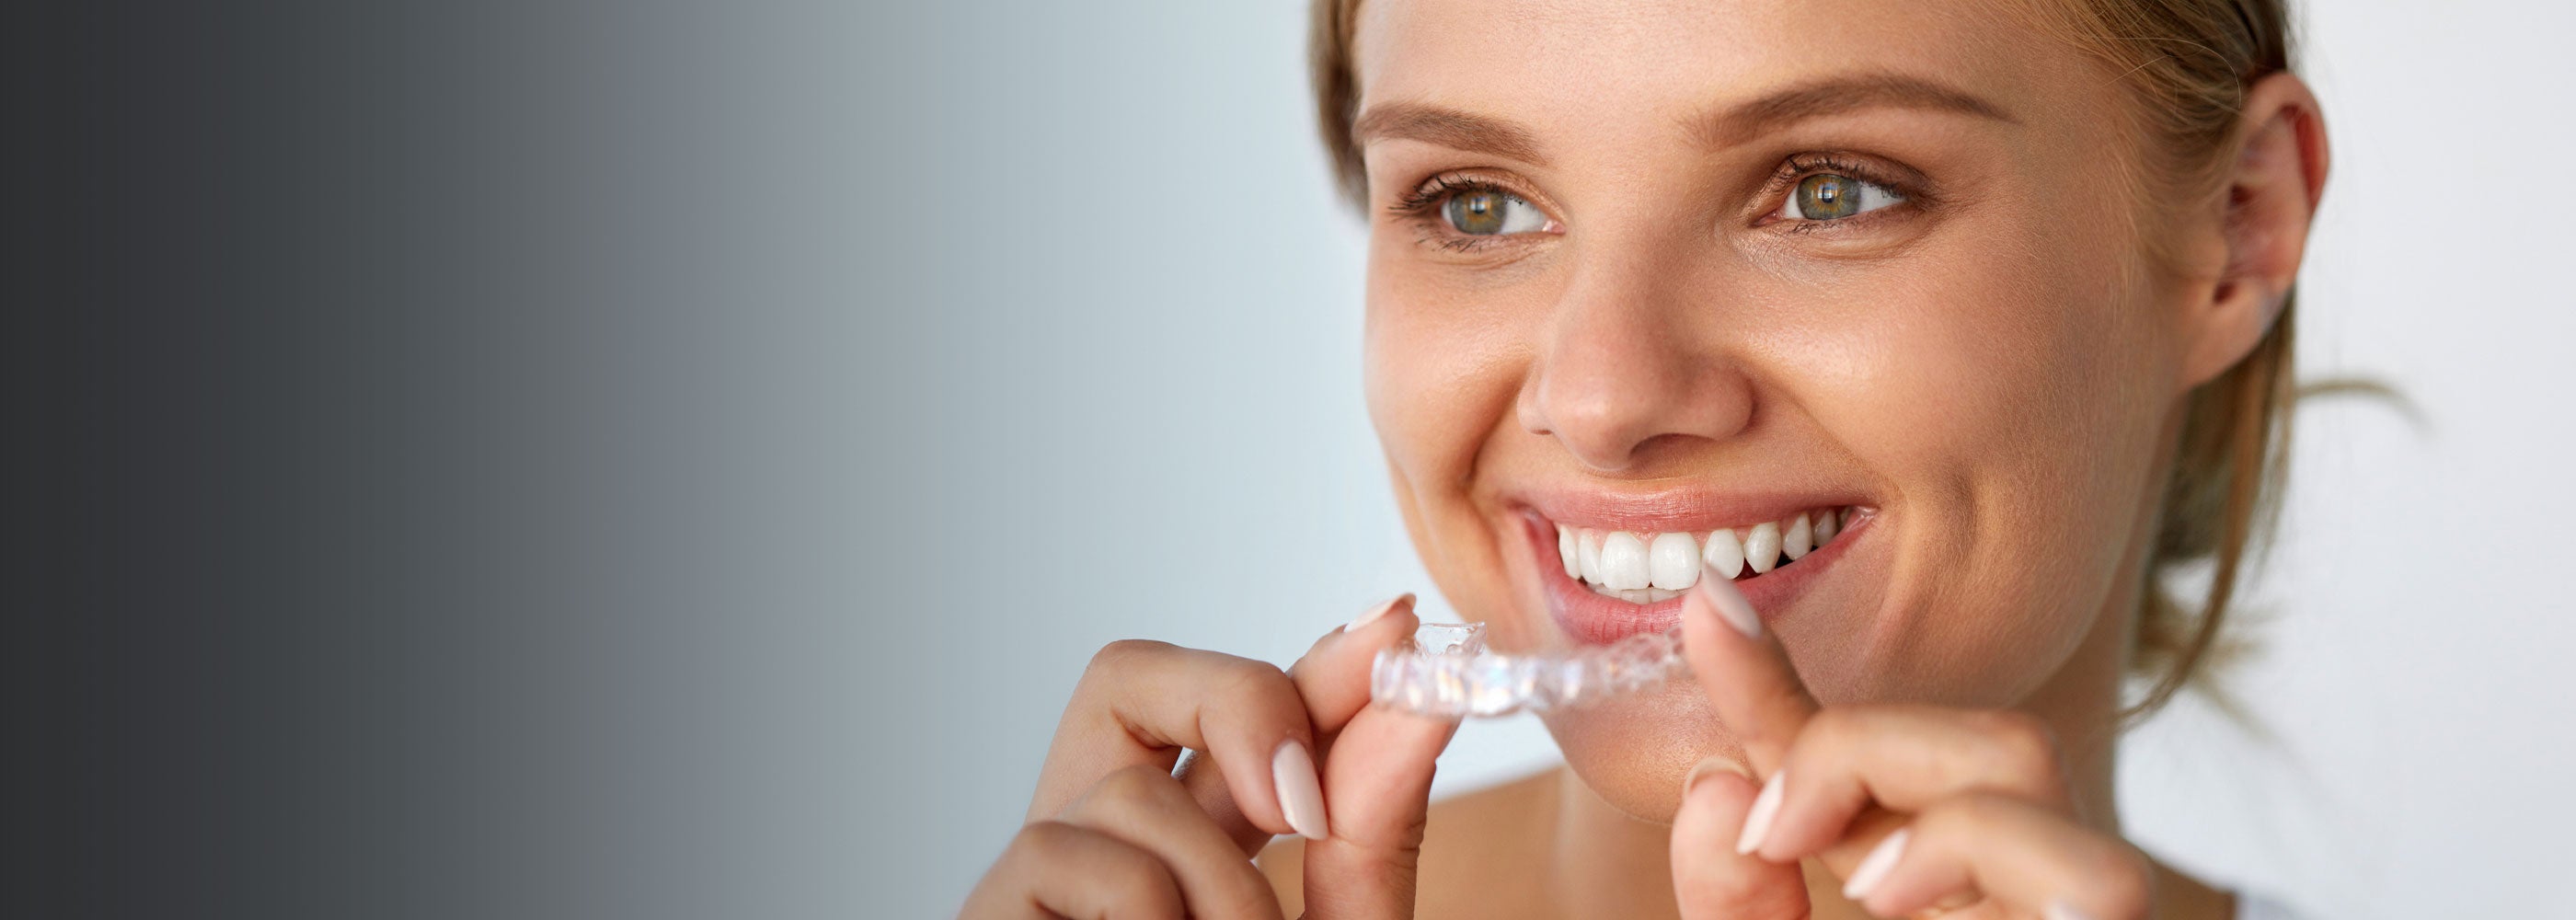 Orthodontic patient holding clear aligner